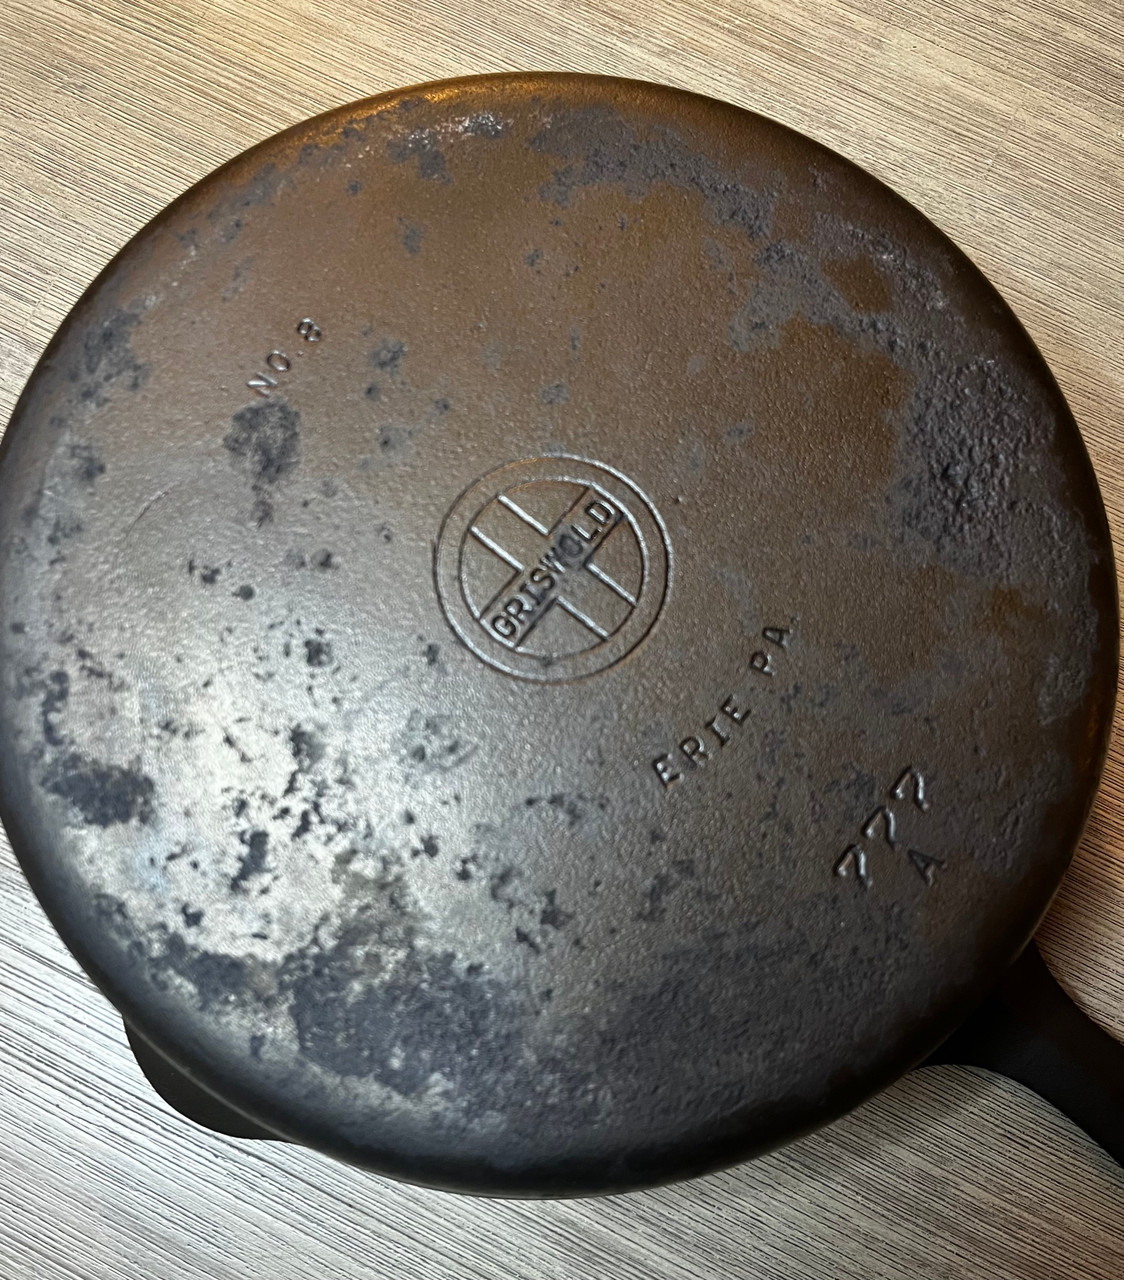 Griswold Cast Iron No 8 Chicken Fryer Skillet in a Hammered -  New  Zealand